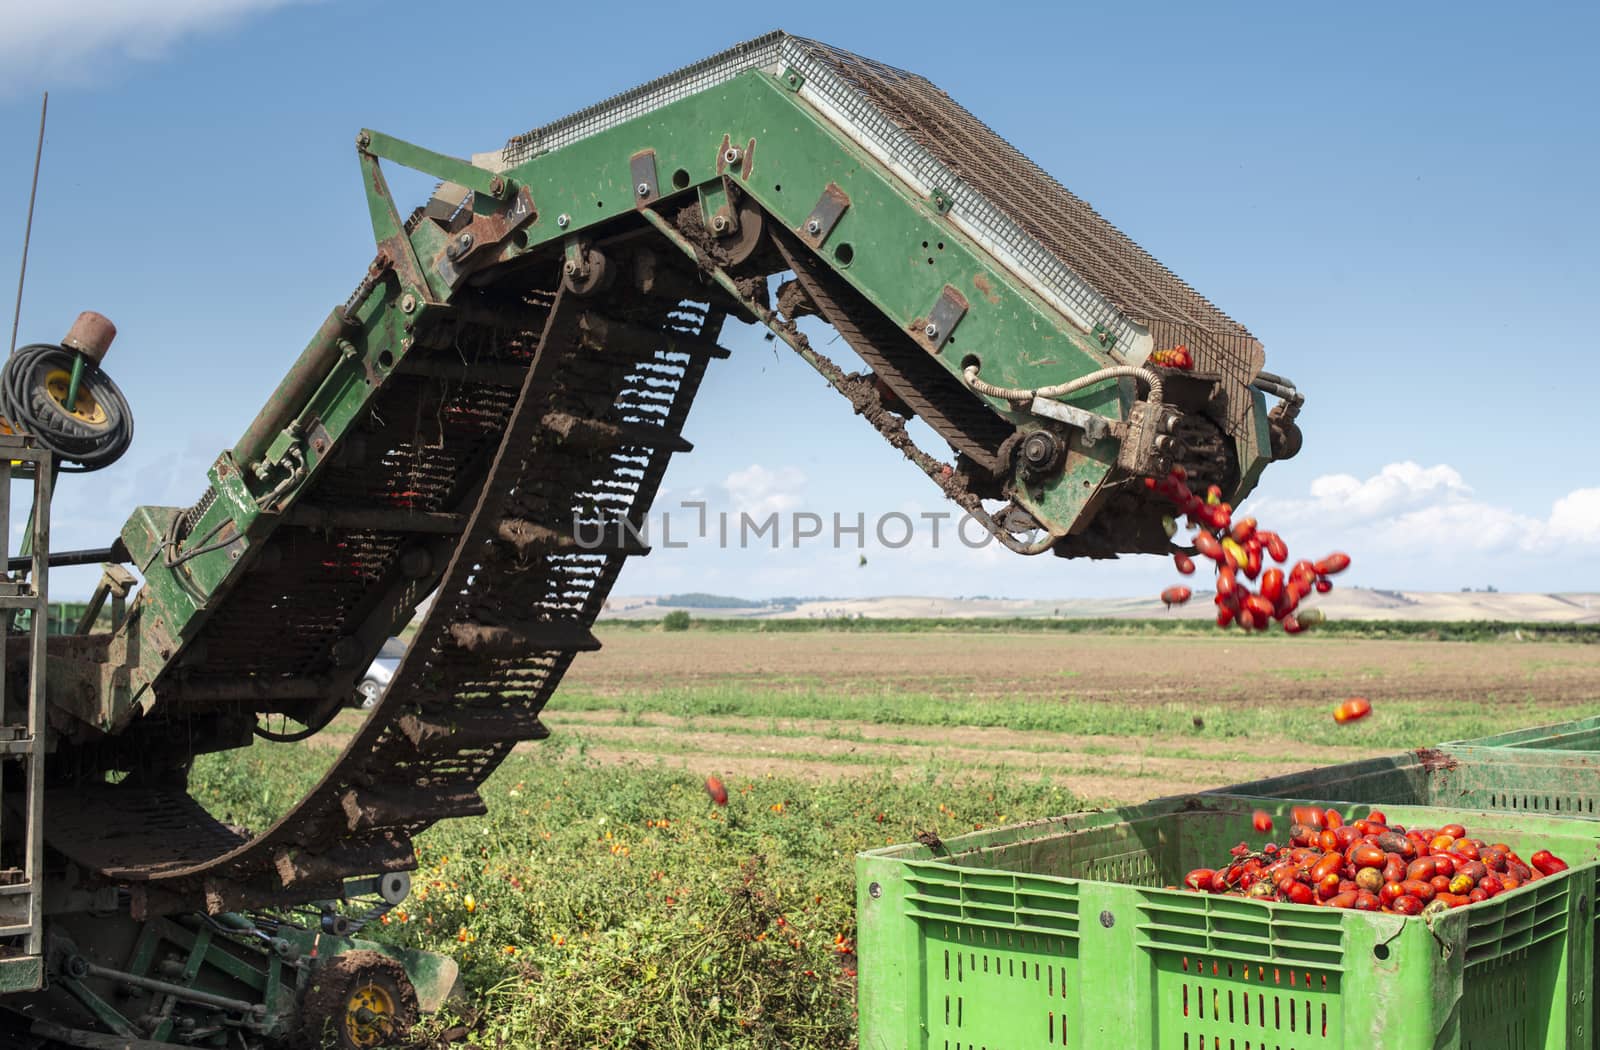 Machine with transport line for picking tomatoes on the field. Tractor harvester harvest tomatoes and load in crates. Automatization agriculture concept with tomatoes.